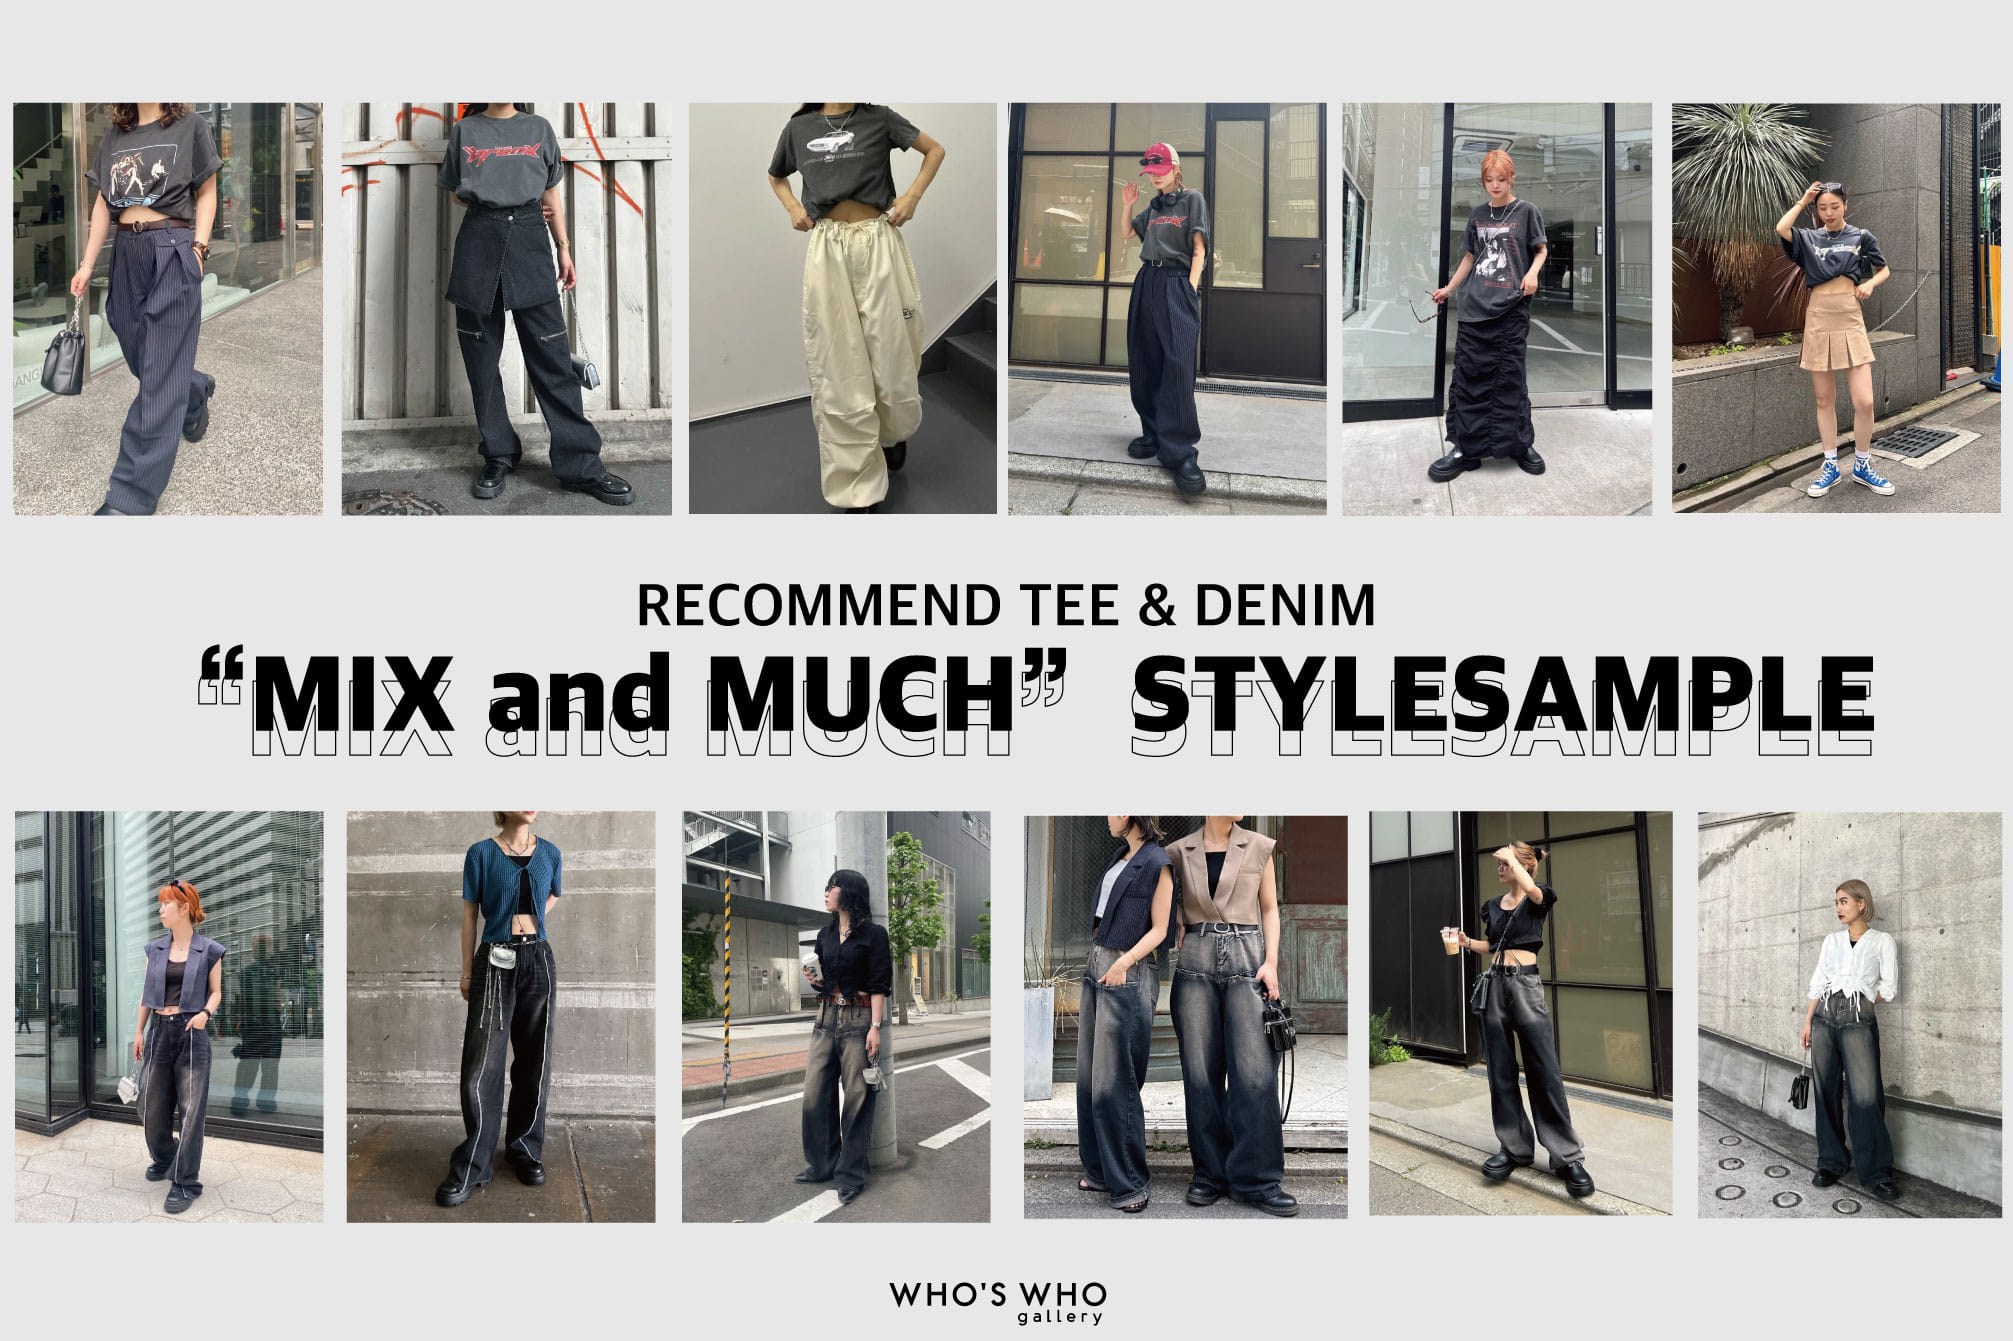 WHO’S WHO gallery 【TEE&DENIM 着回しSTYLE SAMPLE】